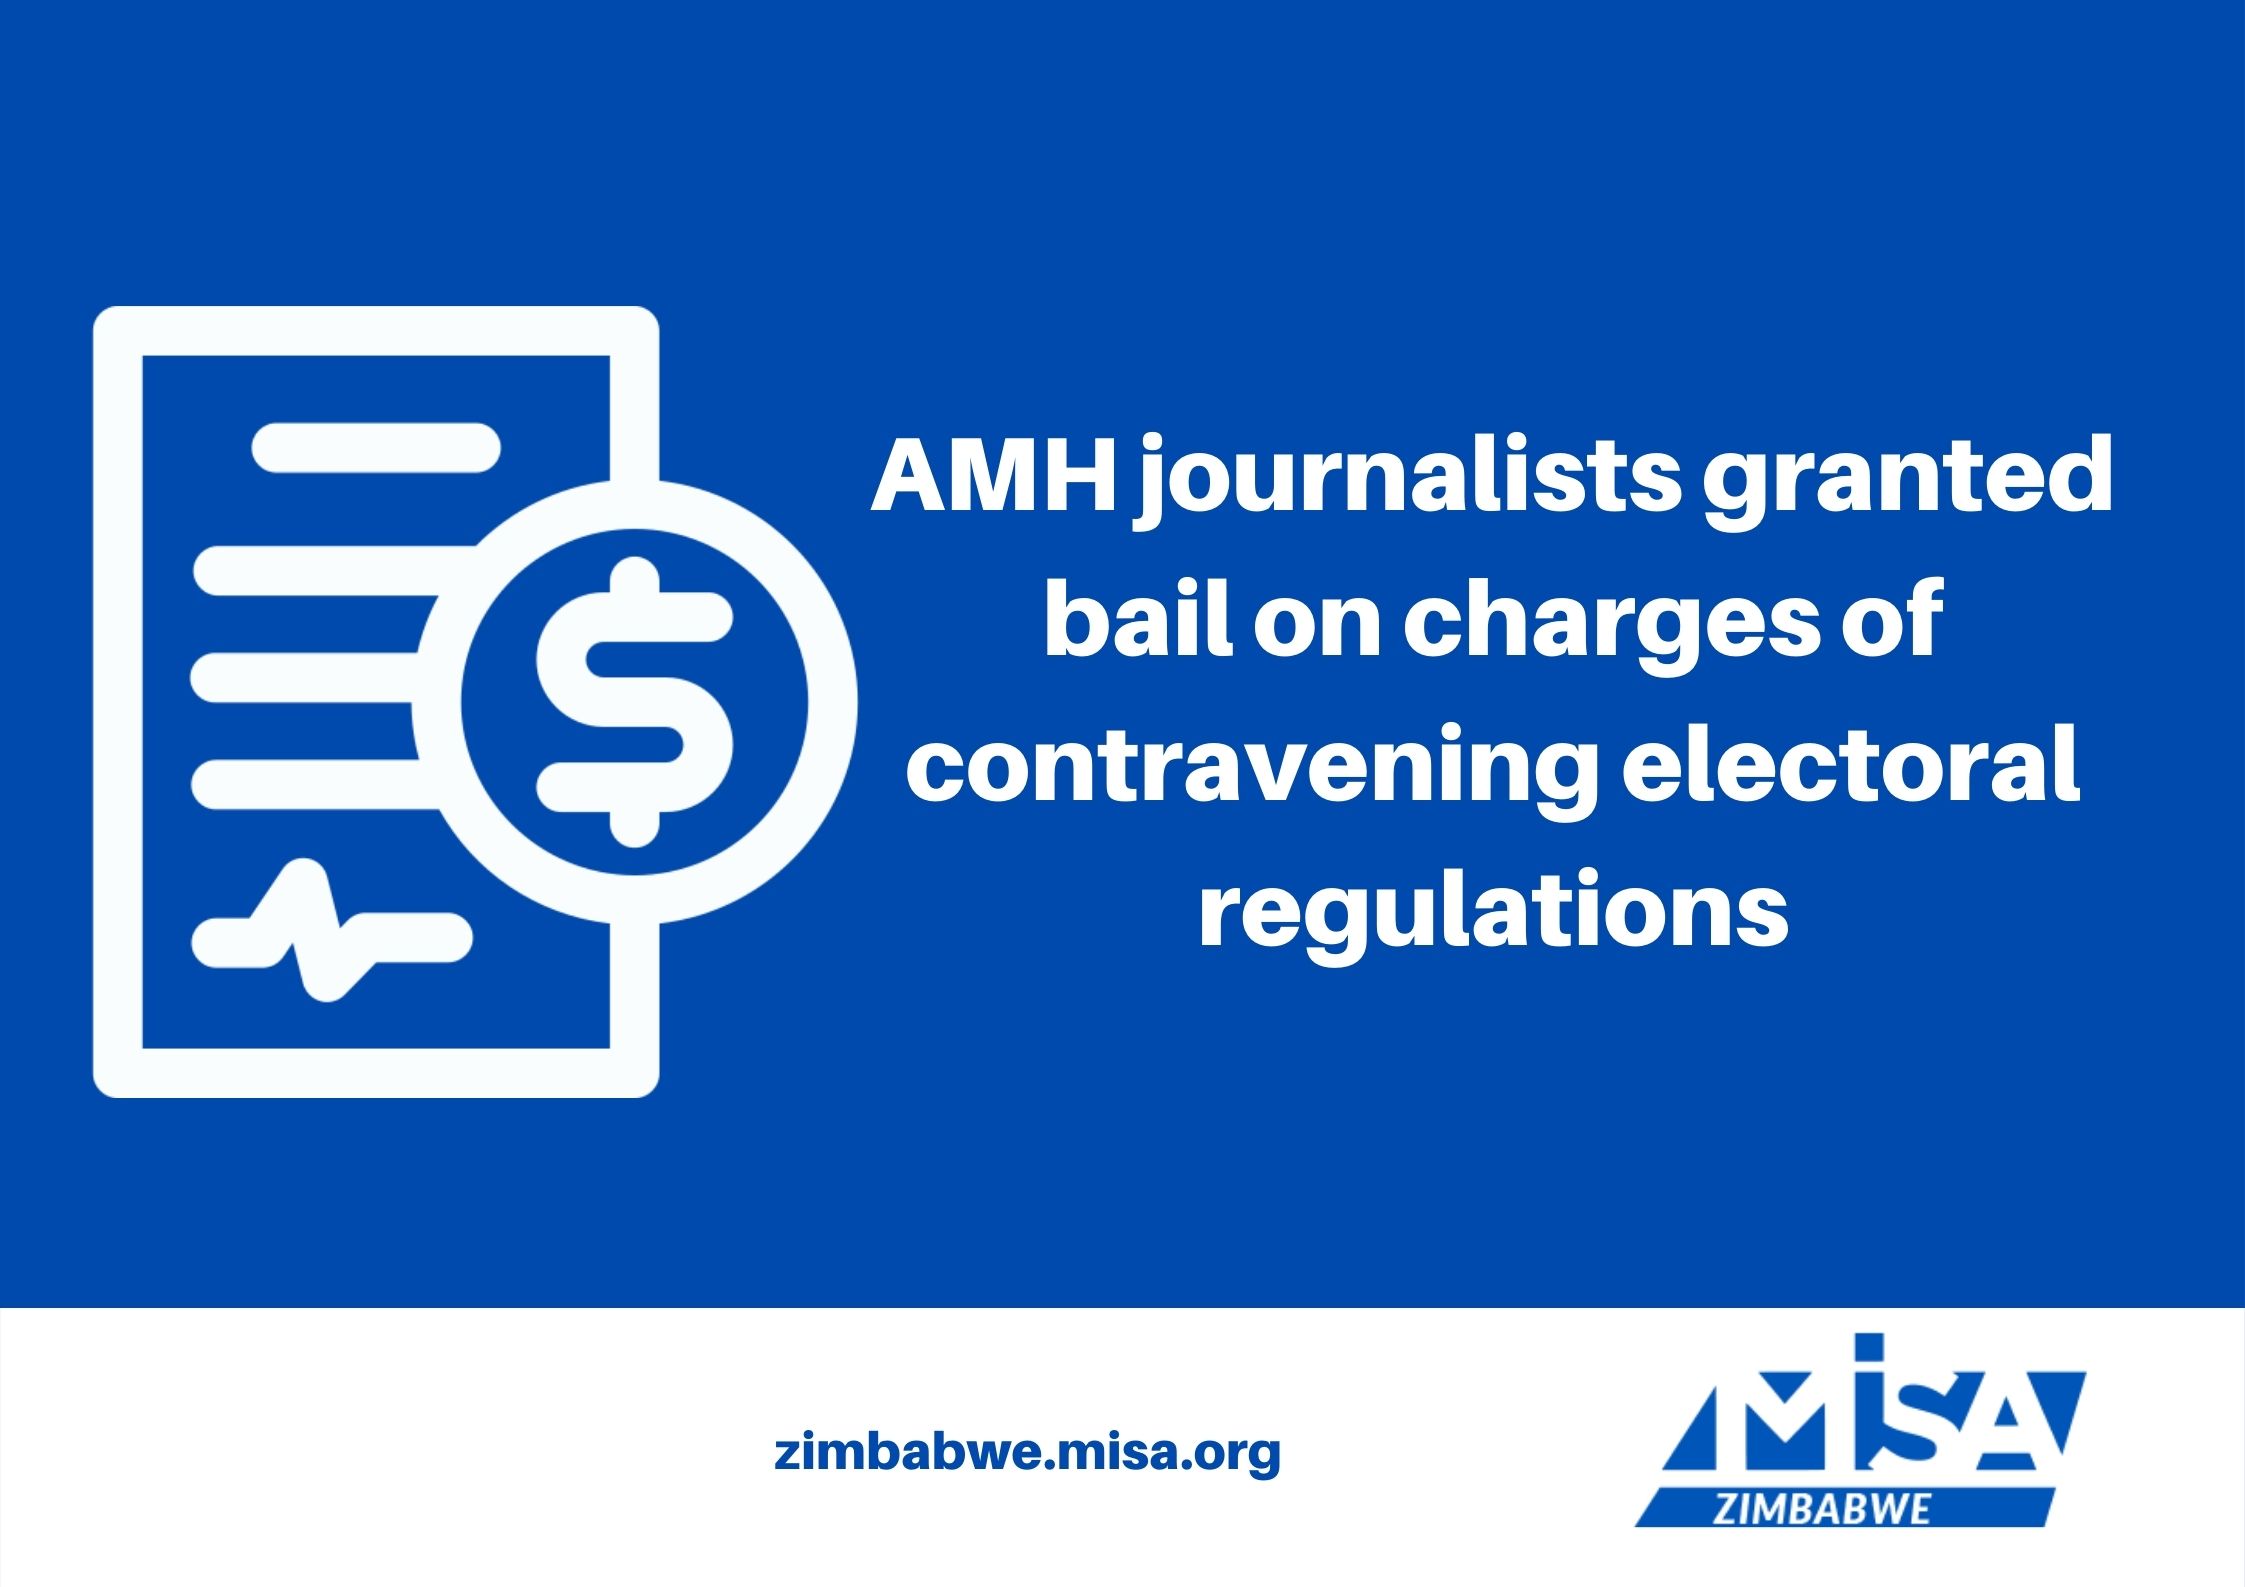 AMH journalists granted bail on charges of contravening electoral regulations